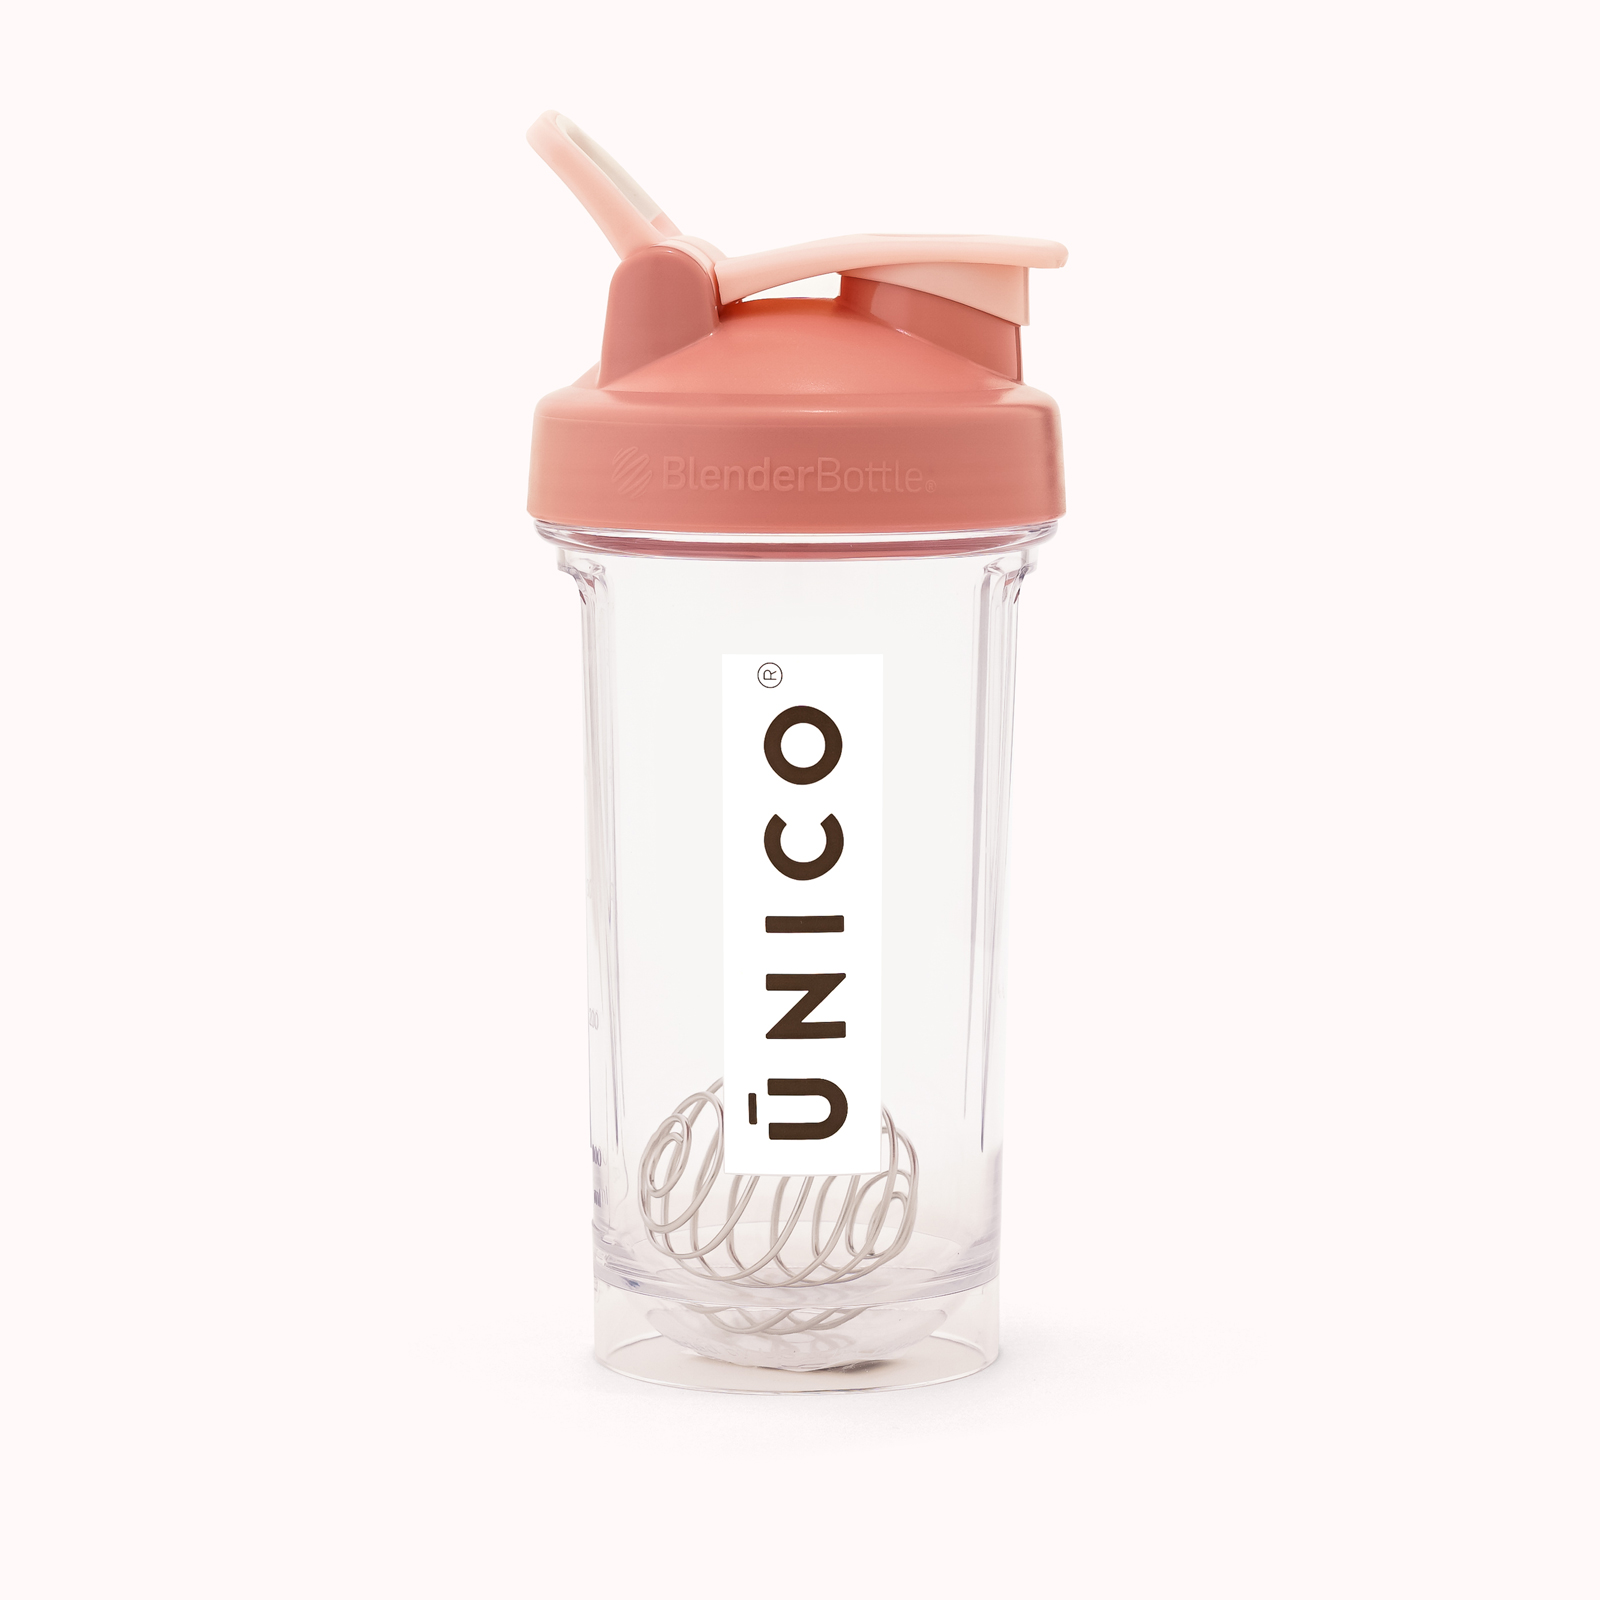 https://uniconutrition.com/wp-content/uploads/2022/07/clear-crystal-shaker-photo-tan.jpg